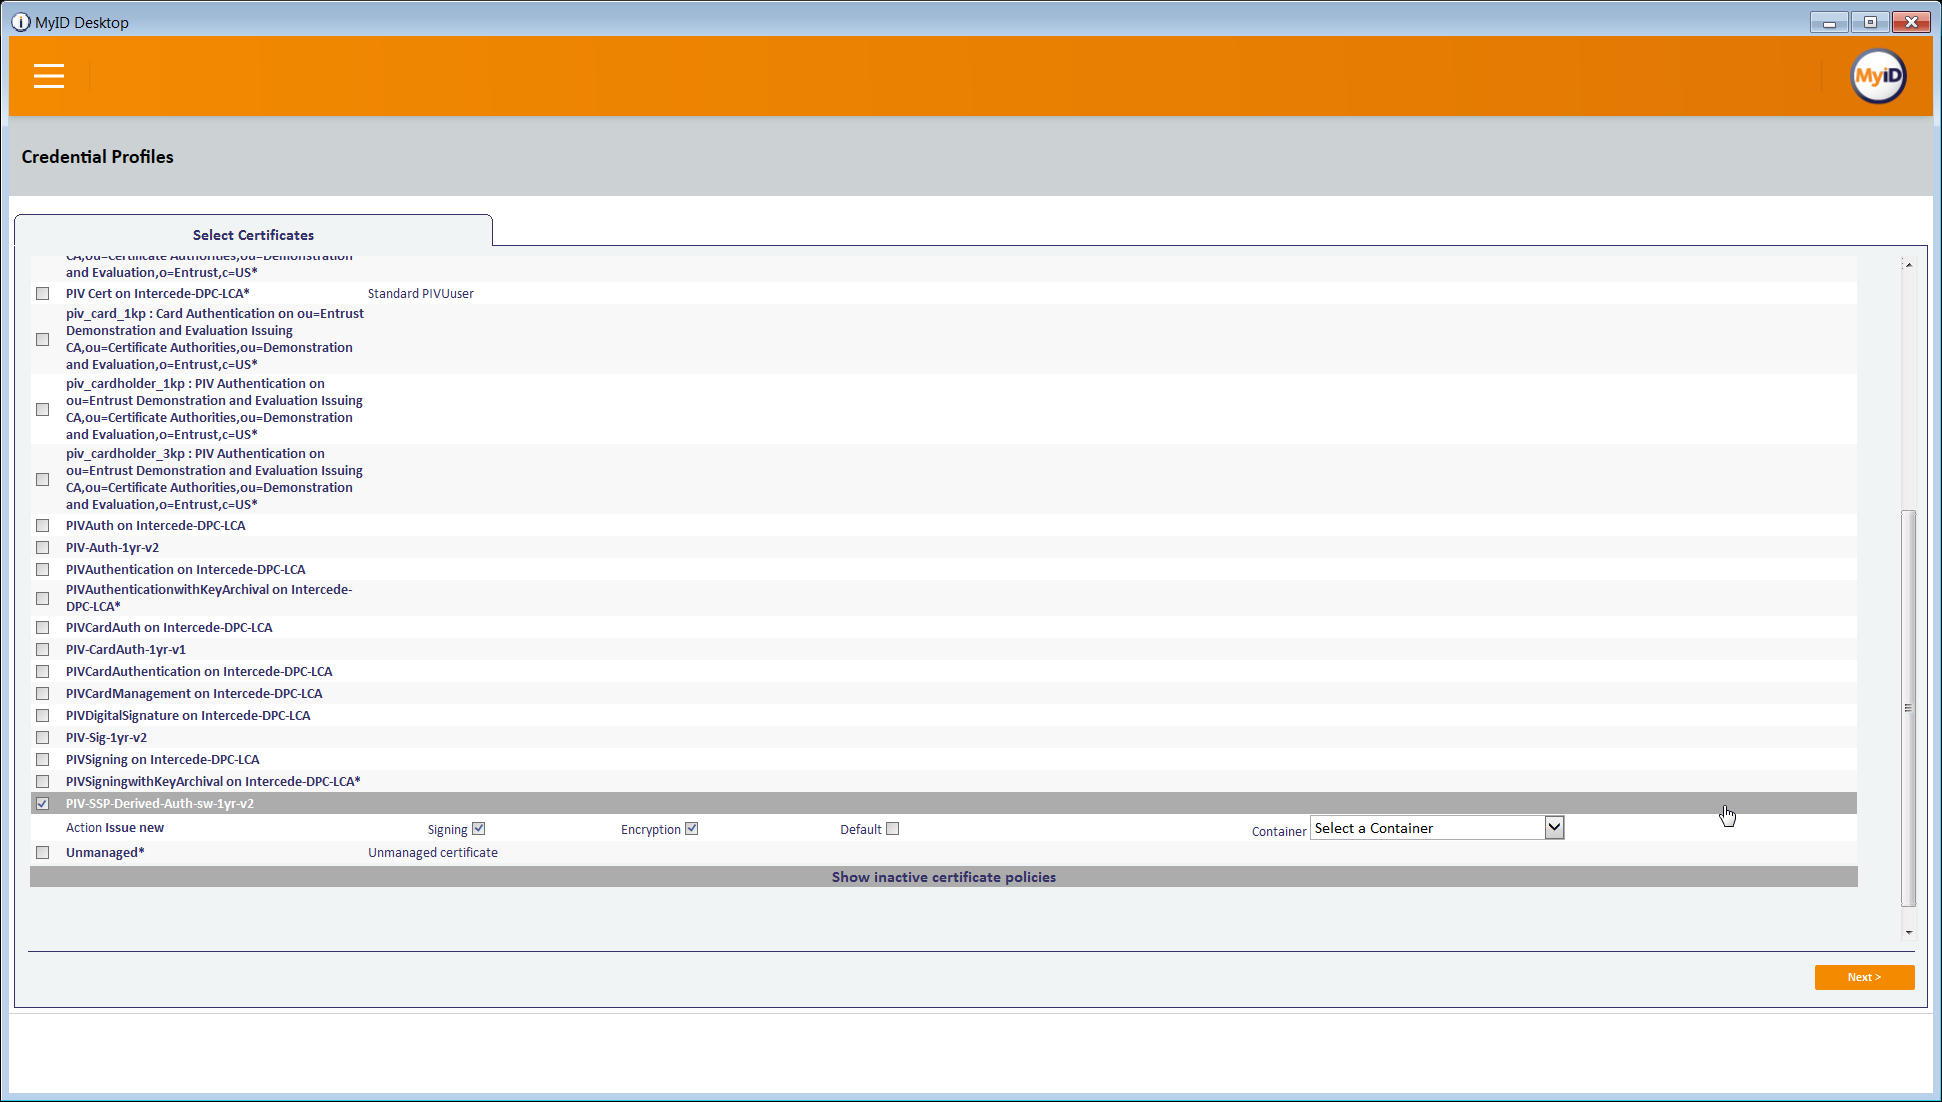 A screenshot of the Select Certificates tab in Credential Profiles window in the MyID Desktop application.